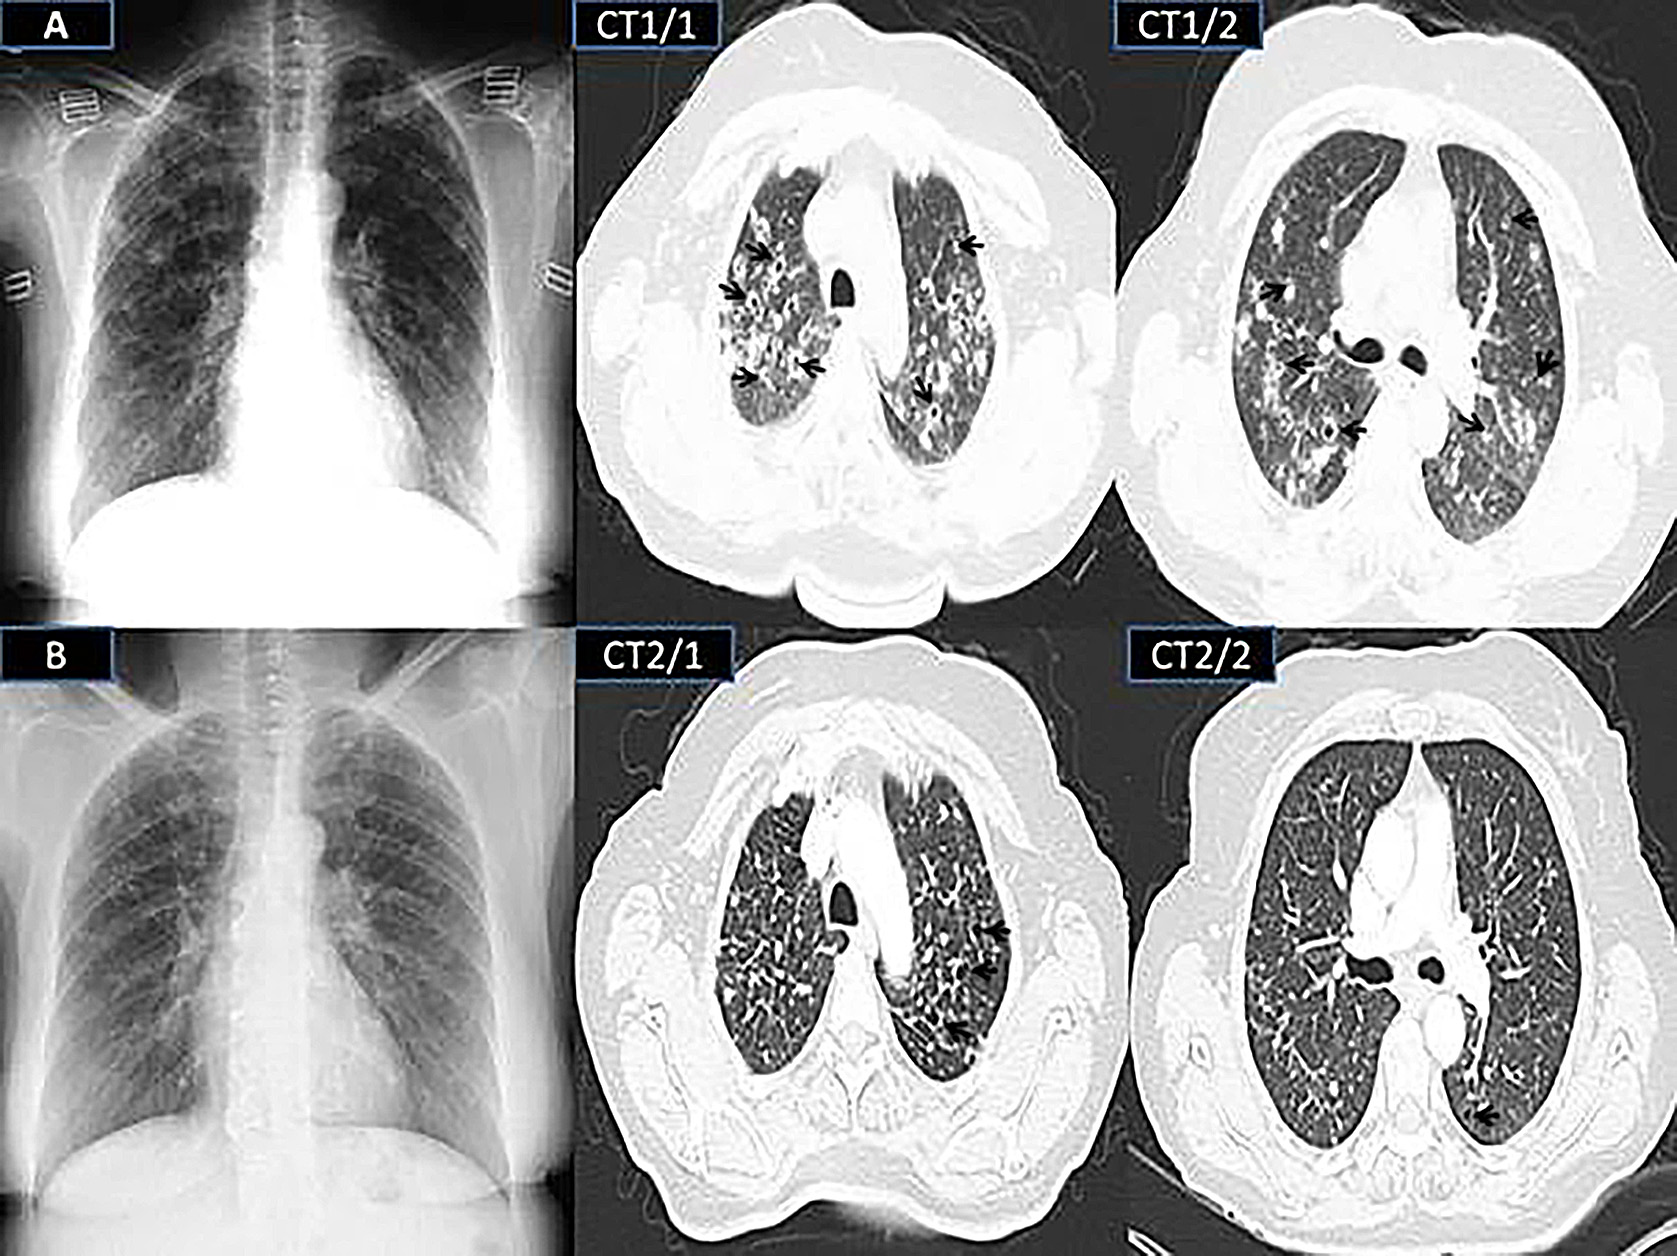 Radiography and thoracic CT images, taken at the time of admission and at 12th months of follow-up. A is showing the chest radiographic image, taken at admission, B is showing the radiographic image, taken at the 12th months of follow-up, CT1/1 and CT1/2 show the computed thoracic images, taken at the admission, and CT2/1 and CT2/2 are showing the computed thoracic images, taken at the 12th months of follow-up. Black arrows are indicating cavitary infiltrates.